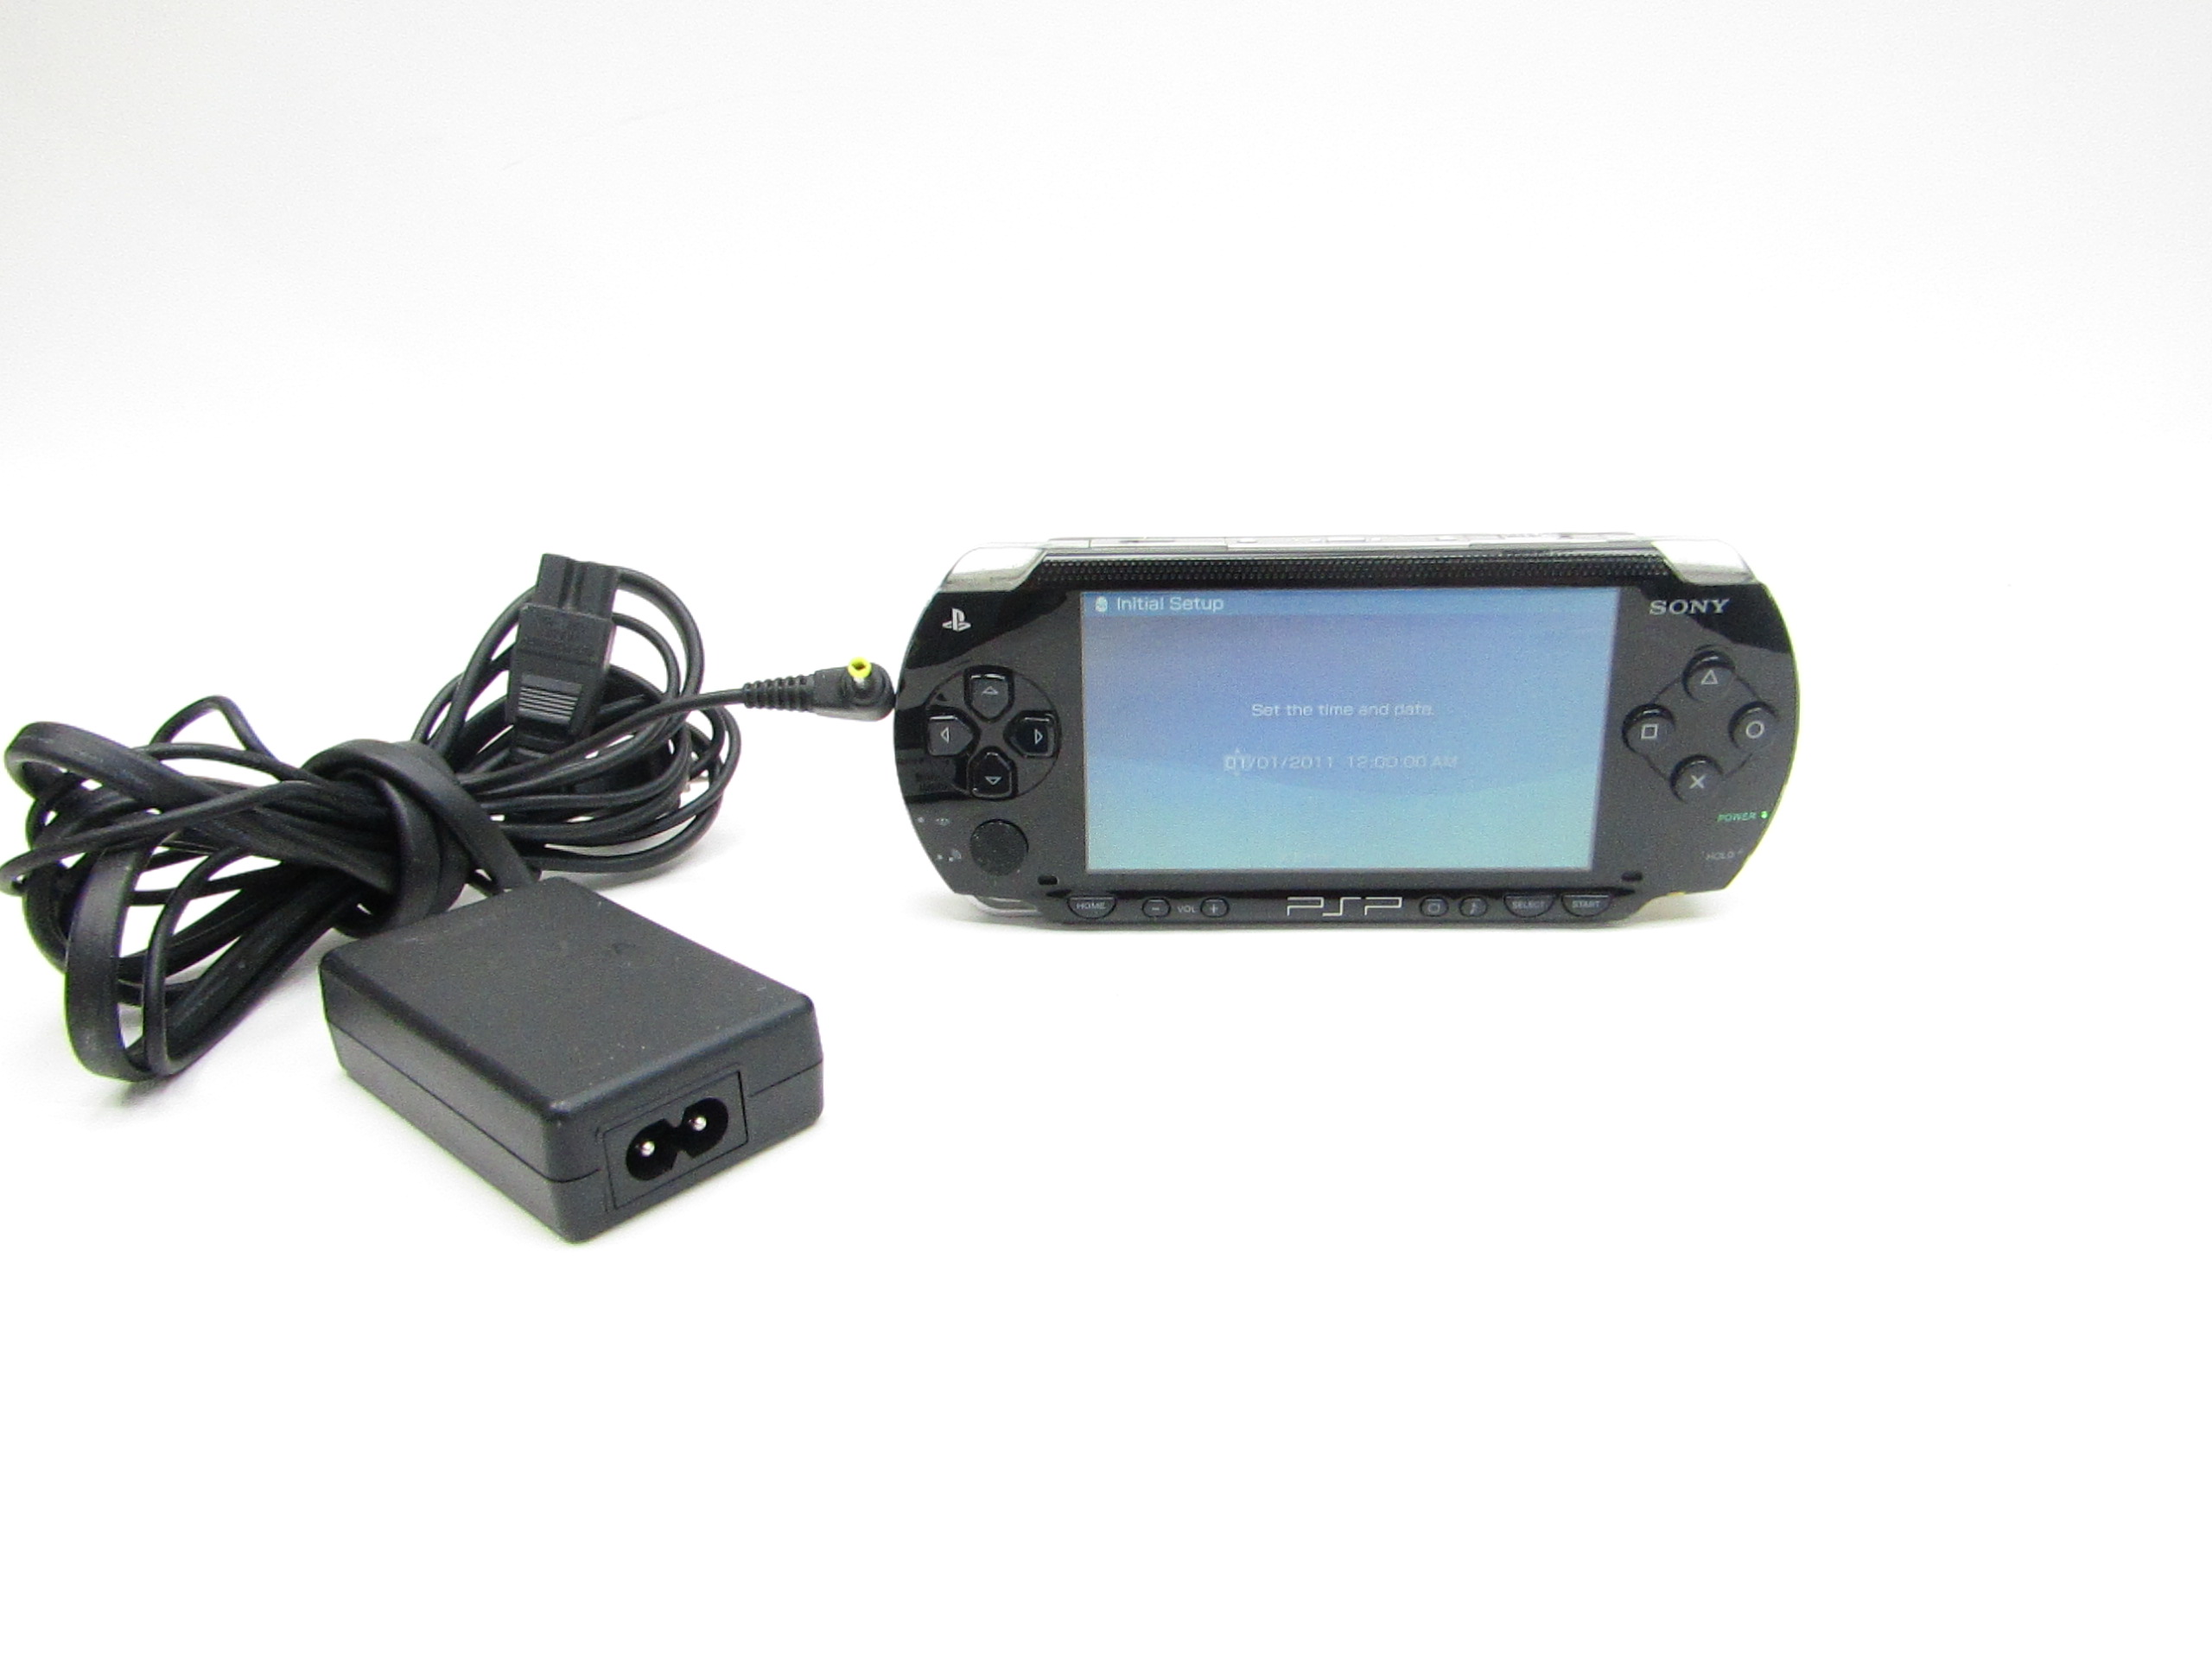 Genuine Sony PSP-100 Charger for Sony PSP 1001 2001 3001 100% OEM